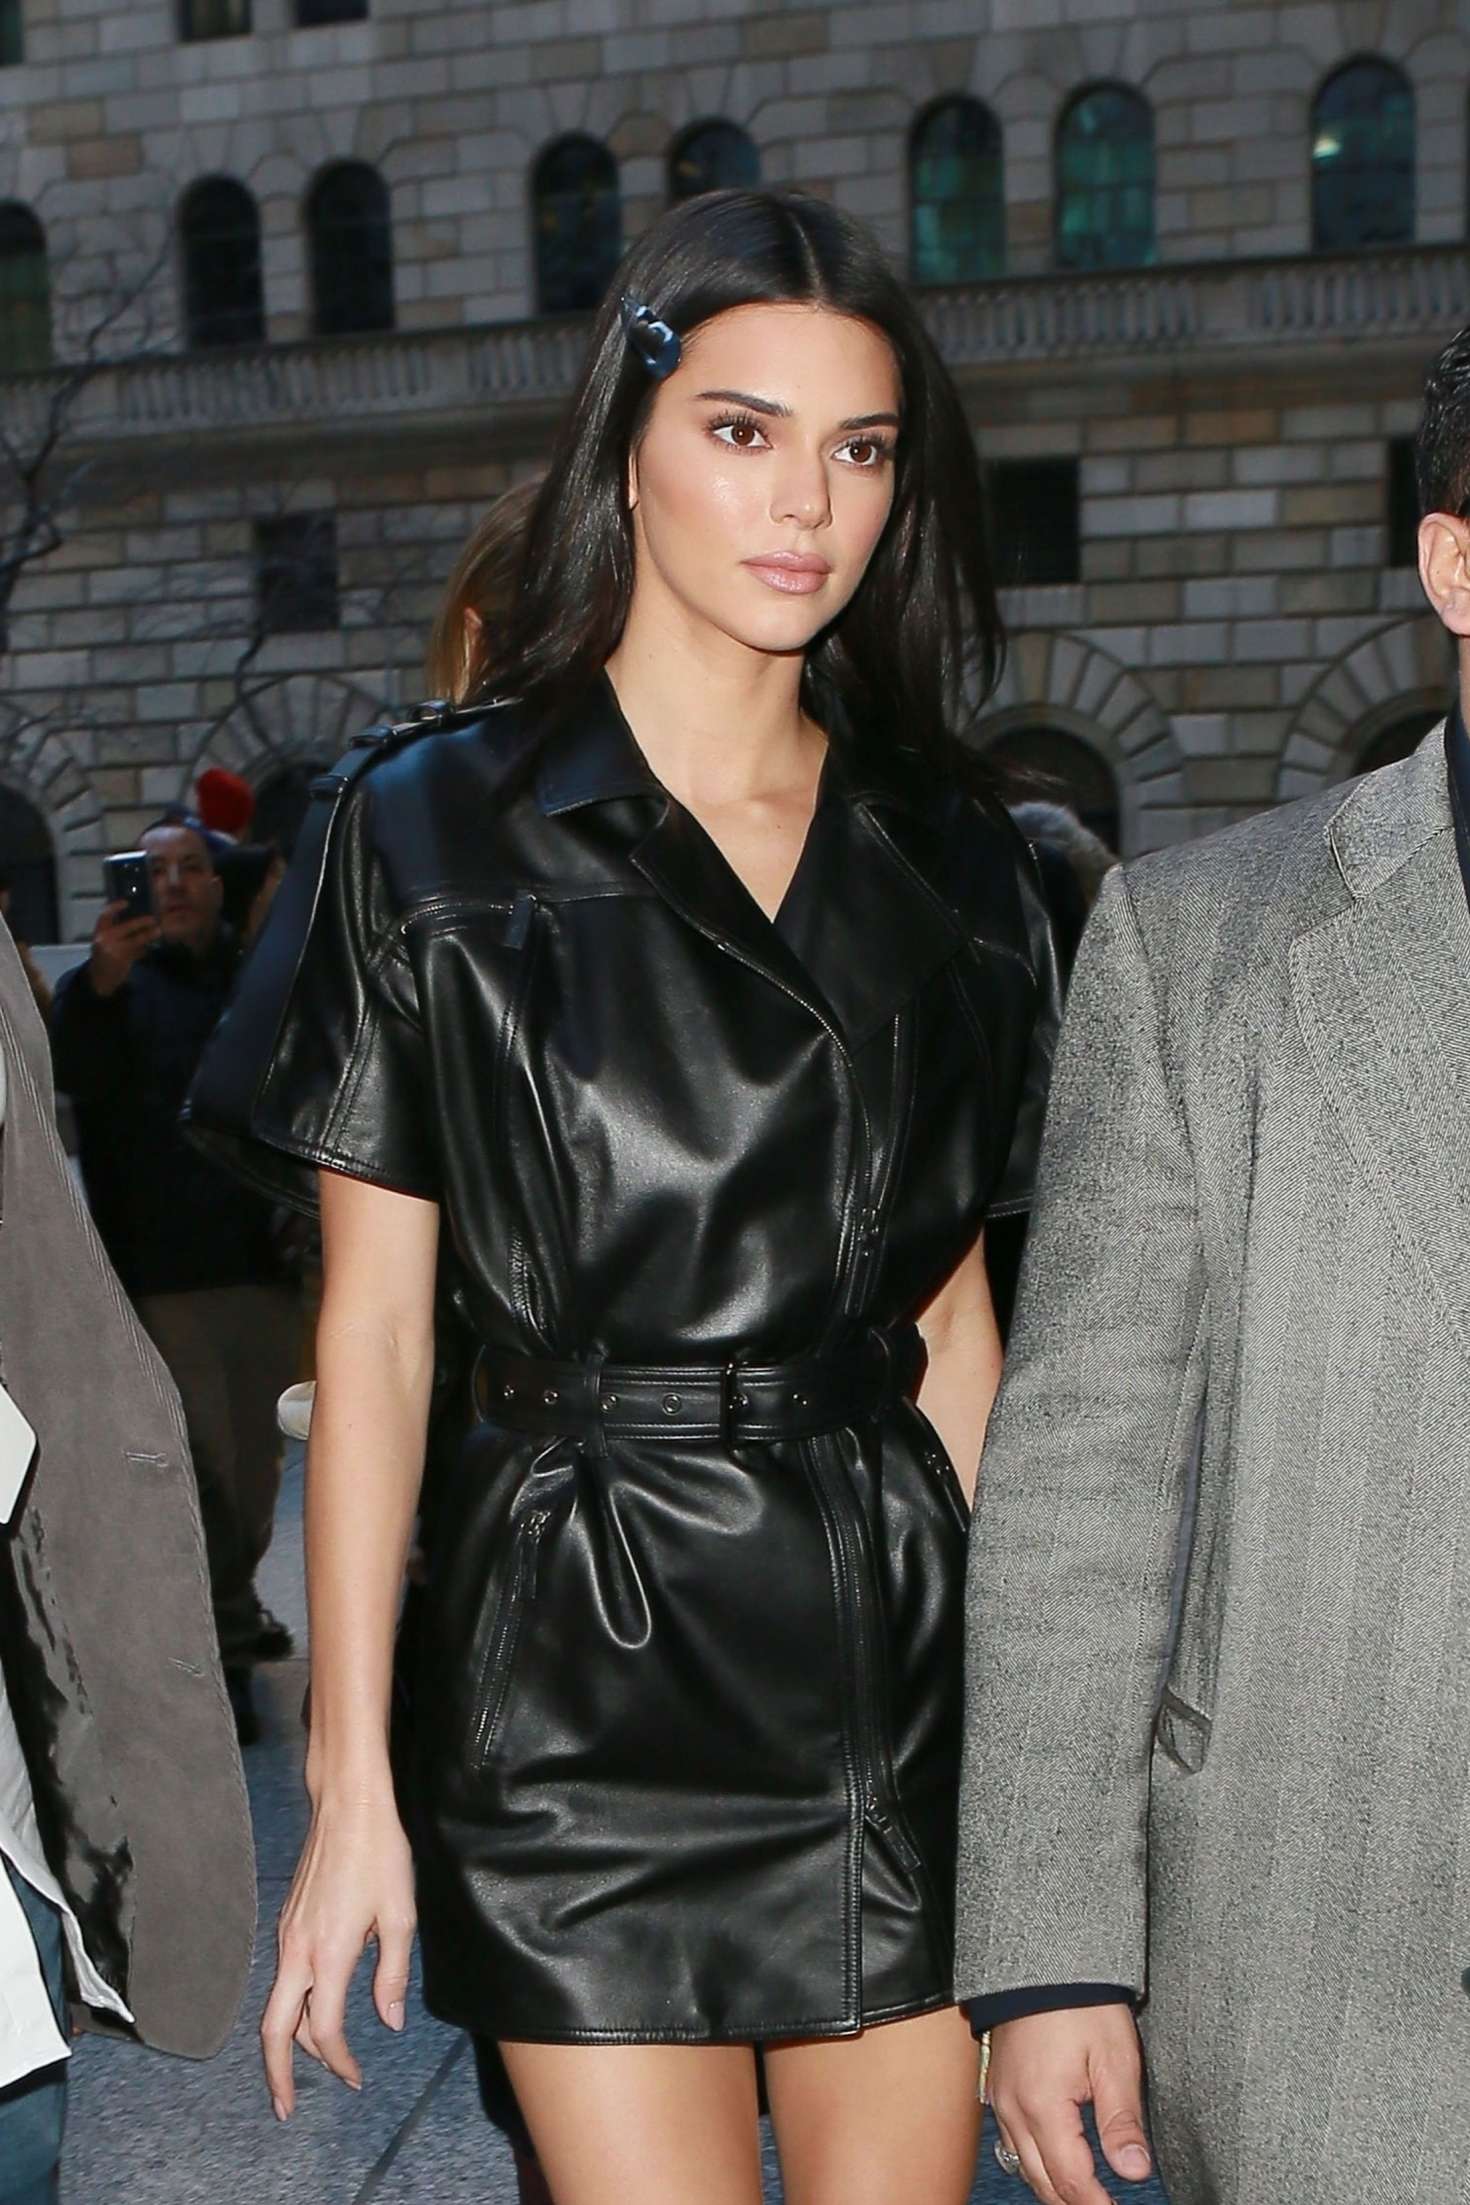 Kendall Jenner in Leather Mini Dress â€“ Arrives at Long Champs Fashion Show in NYC